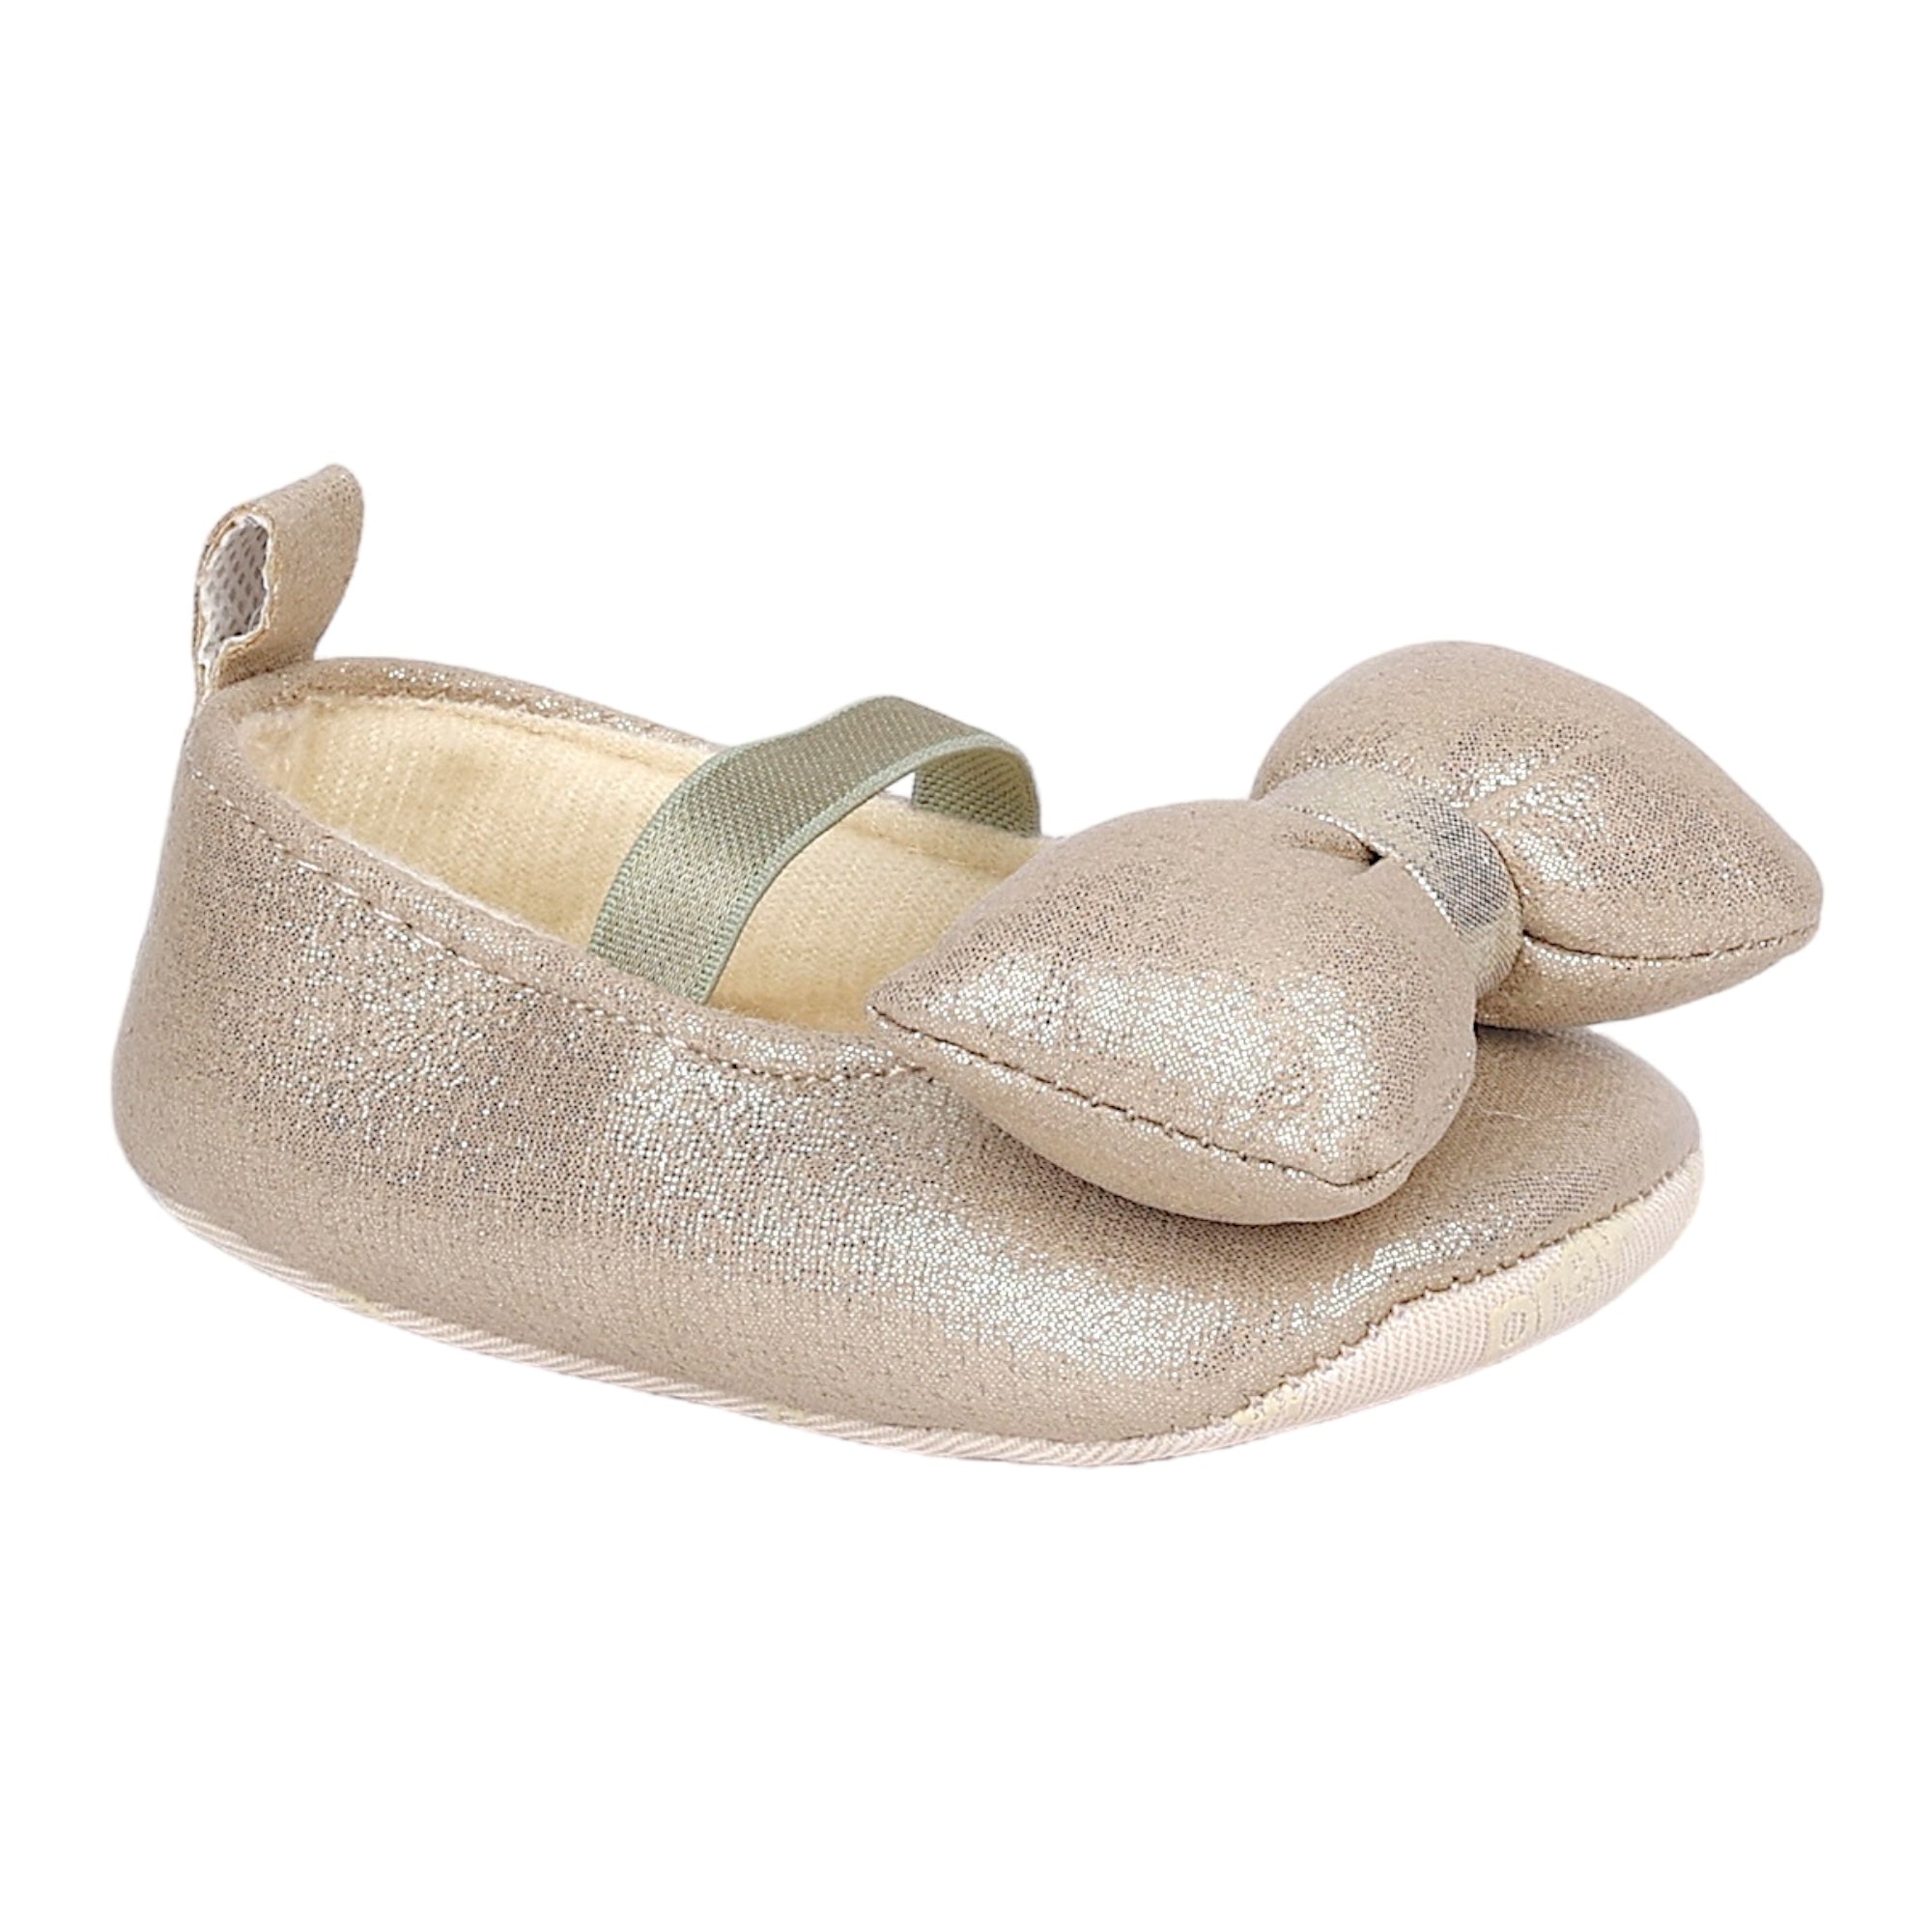 Baby Moo Partywear Shiny Bow Elastic Strap Anti-Skid Ballerina Booties - Gold